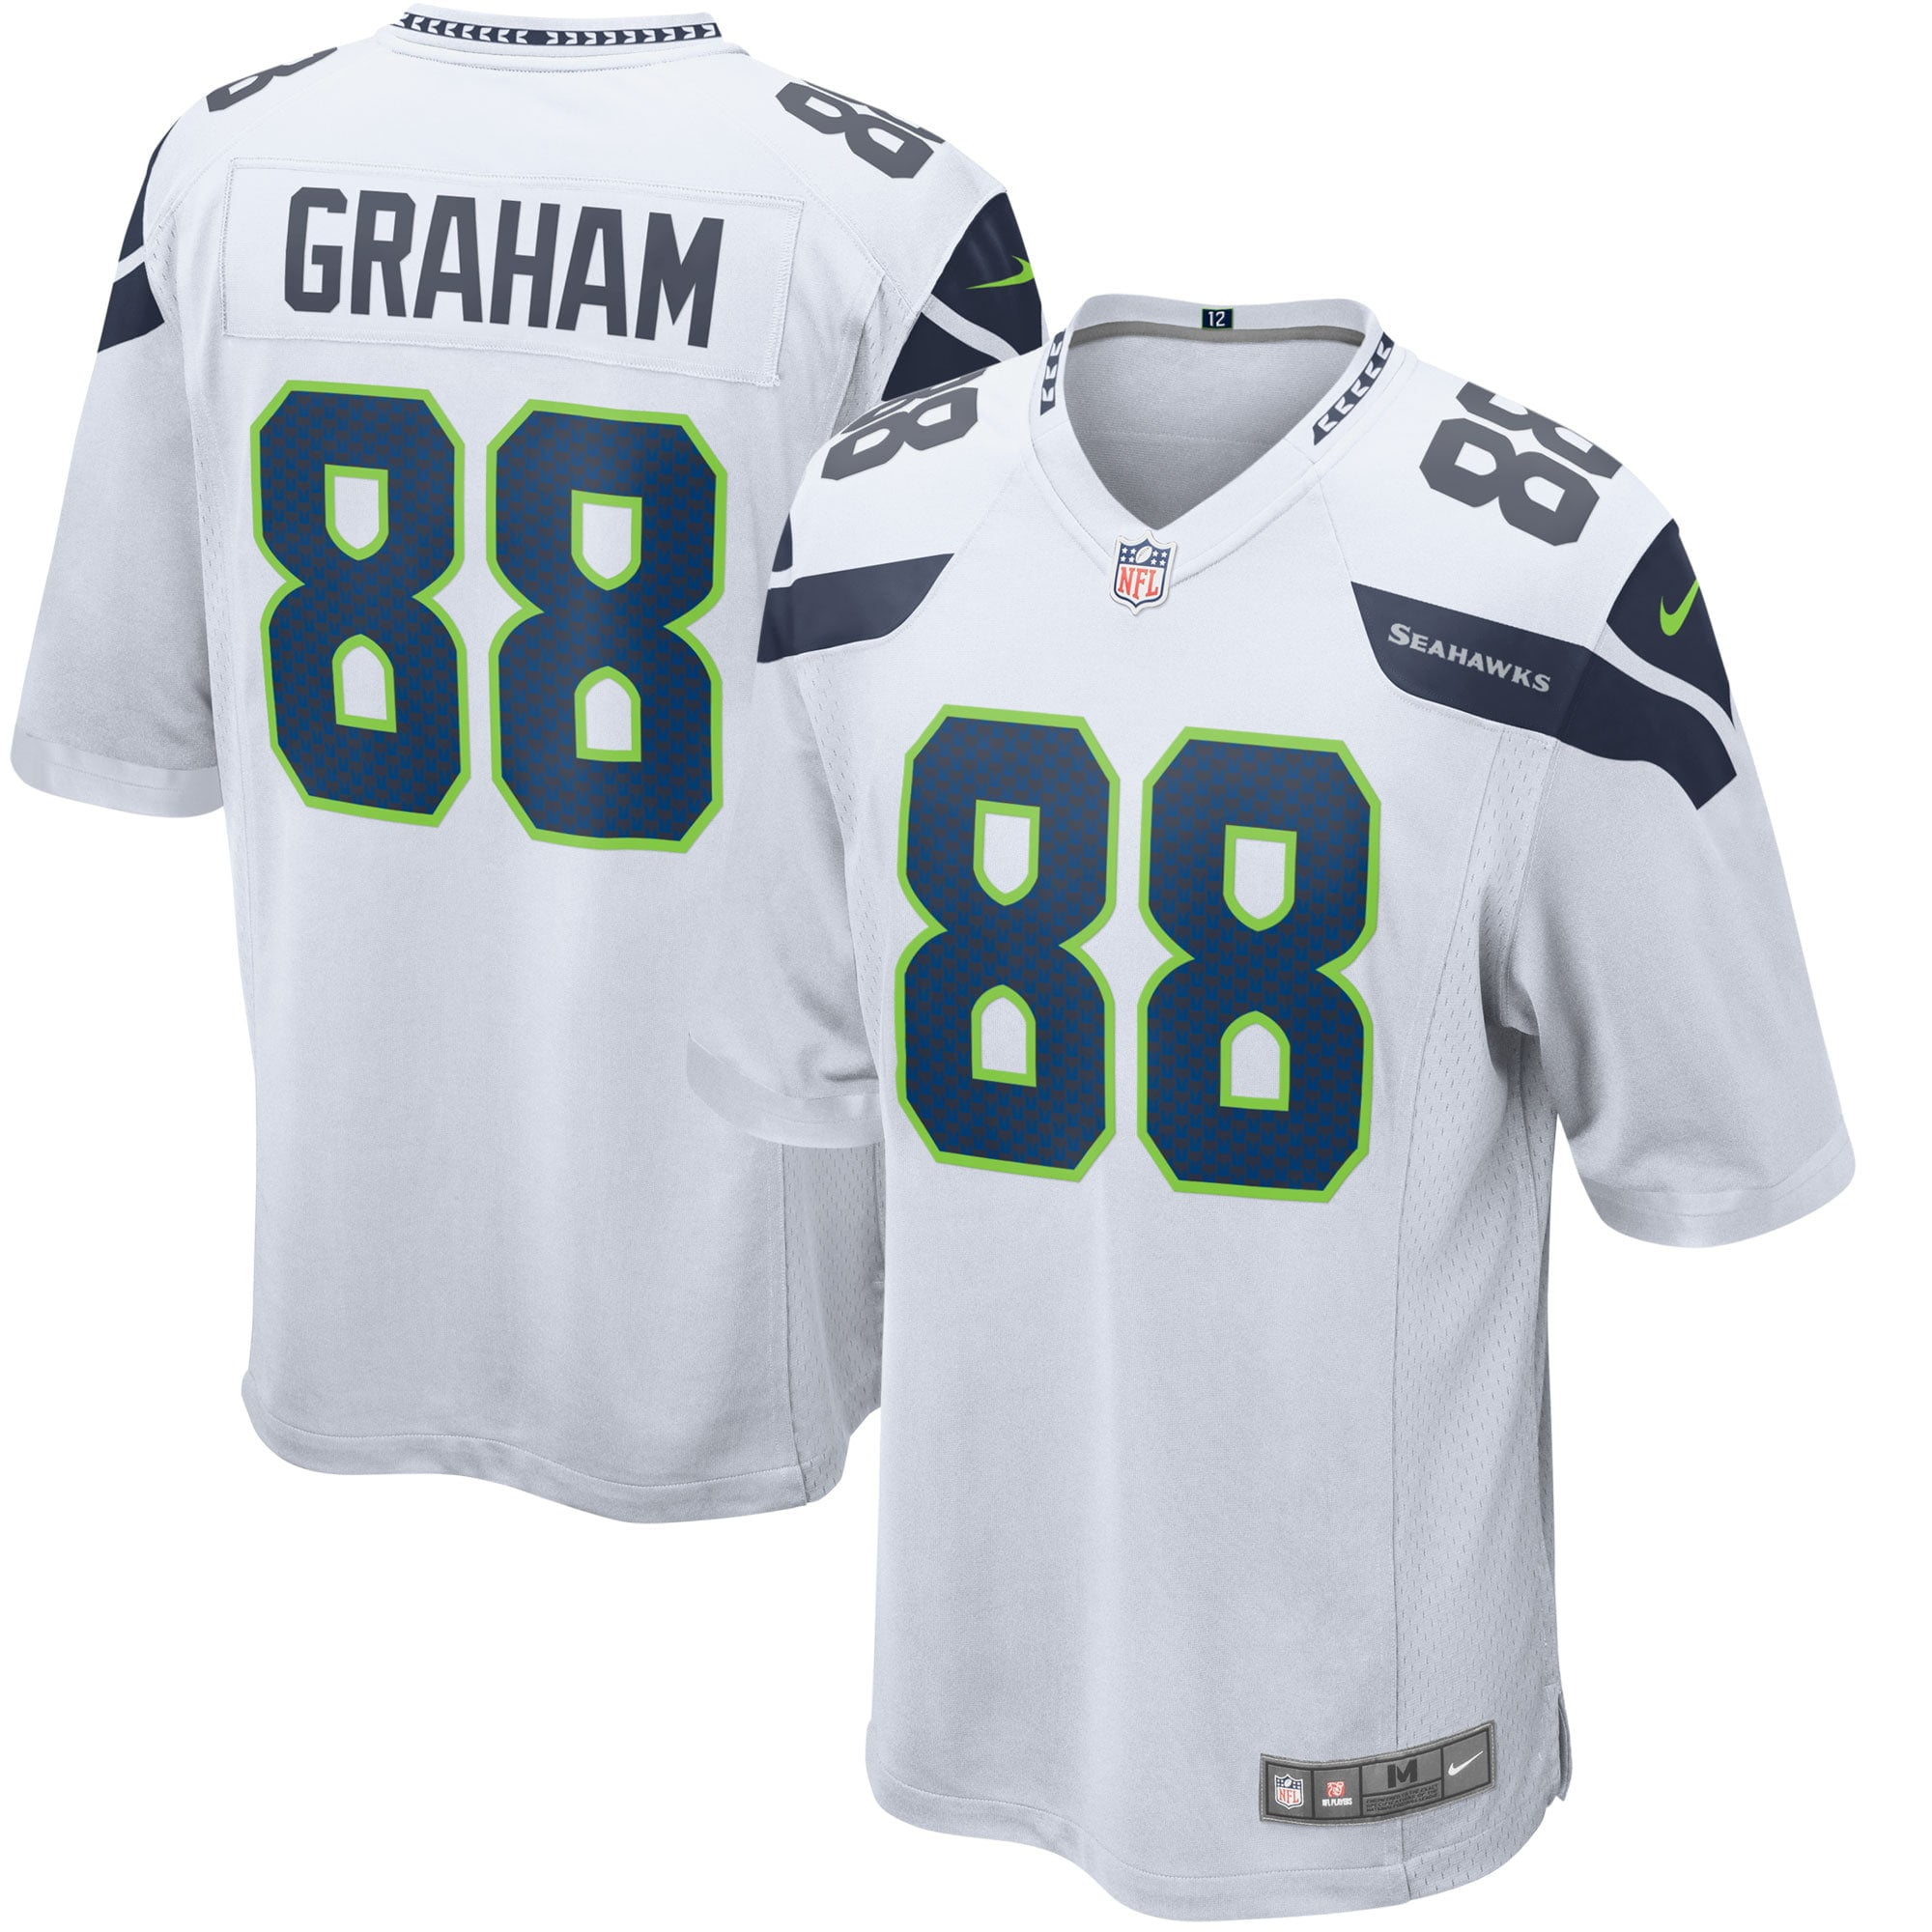 seahawks game day jersey